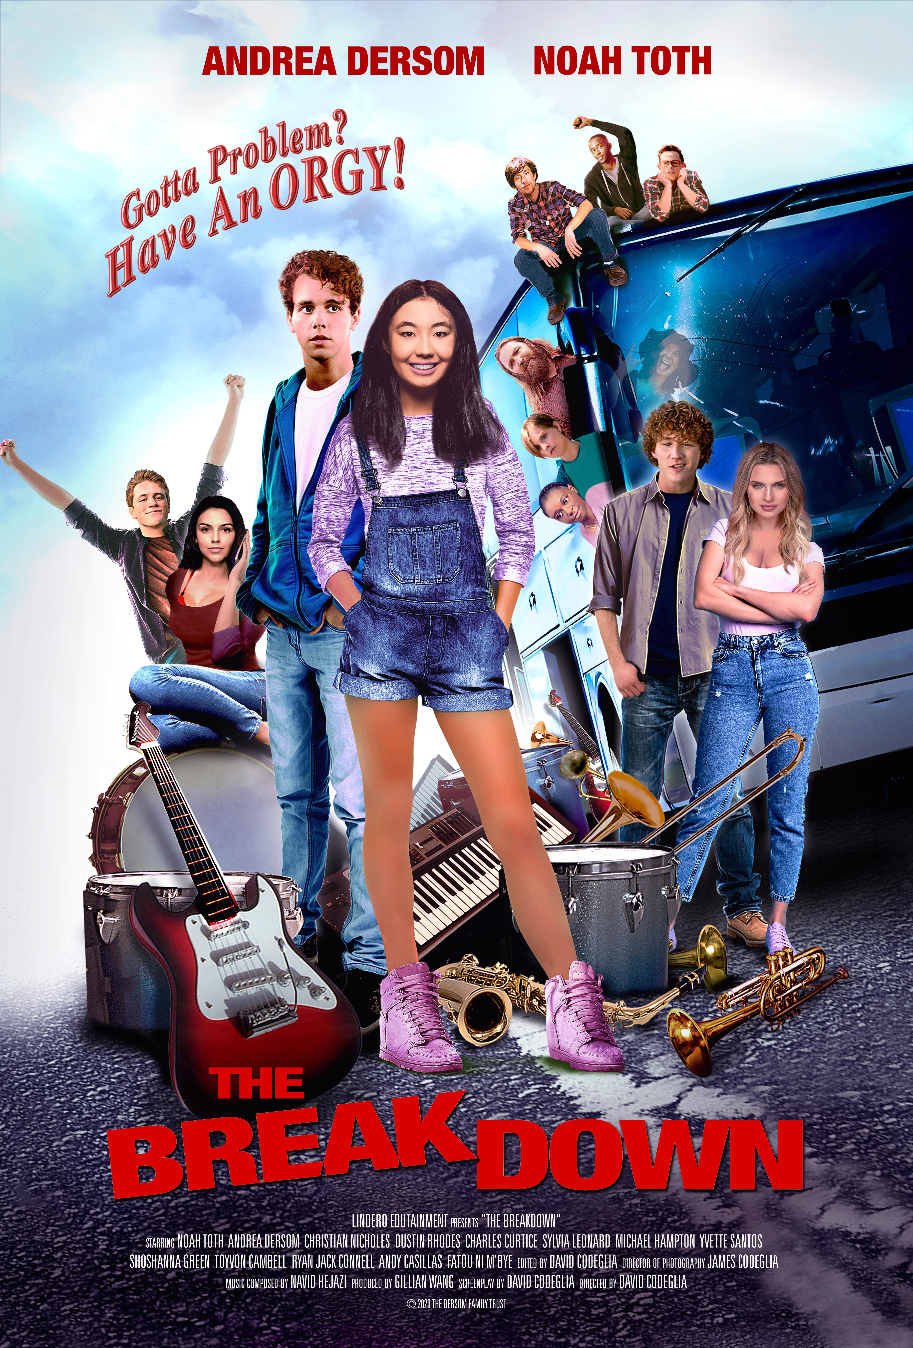 Lindero Edutainment is Proud to Announce the Release of Their Feature Film, "The Breakdown" (2021). It Will Premier on Amazon Prime Video on Saturday, February 13, 2021.